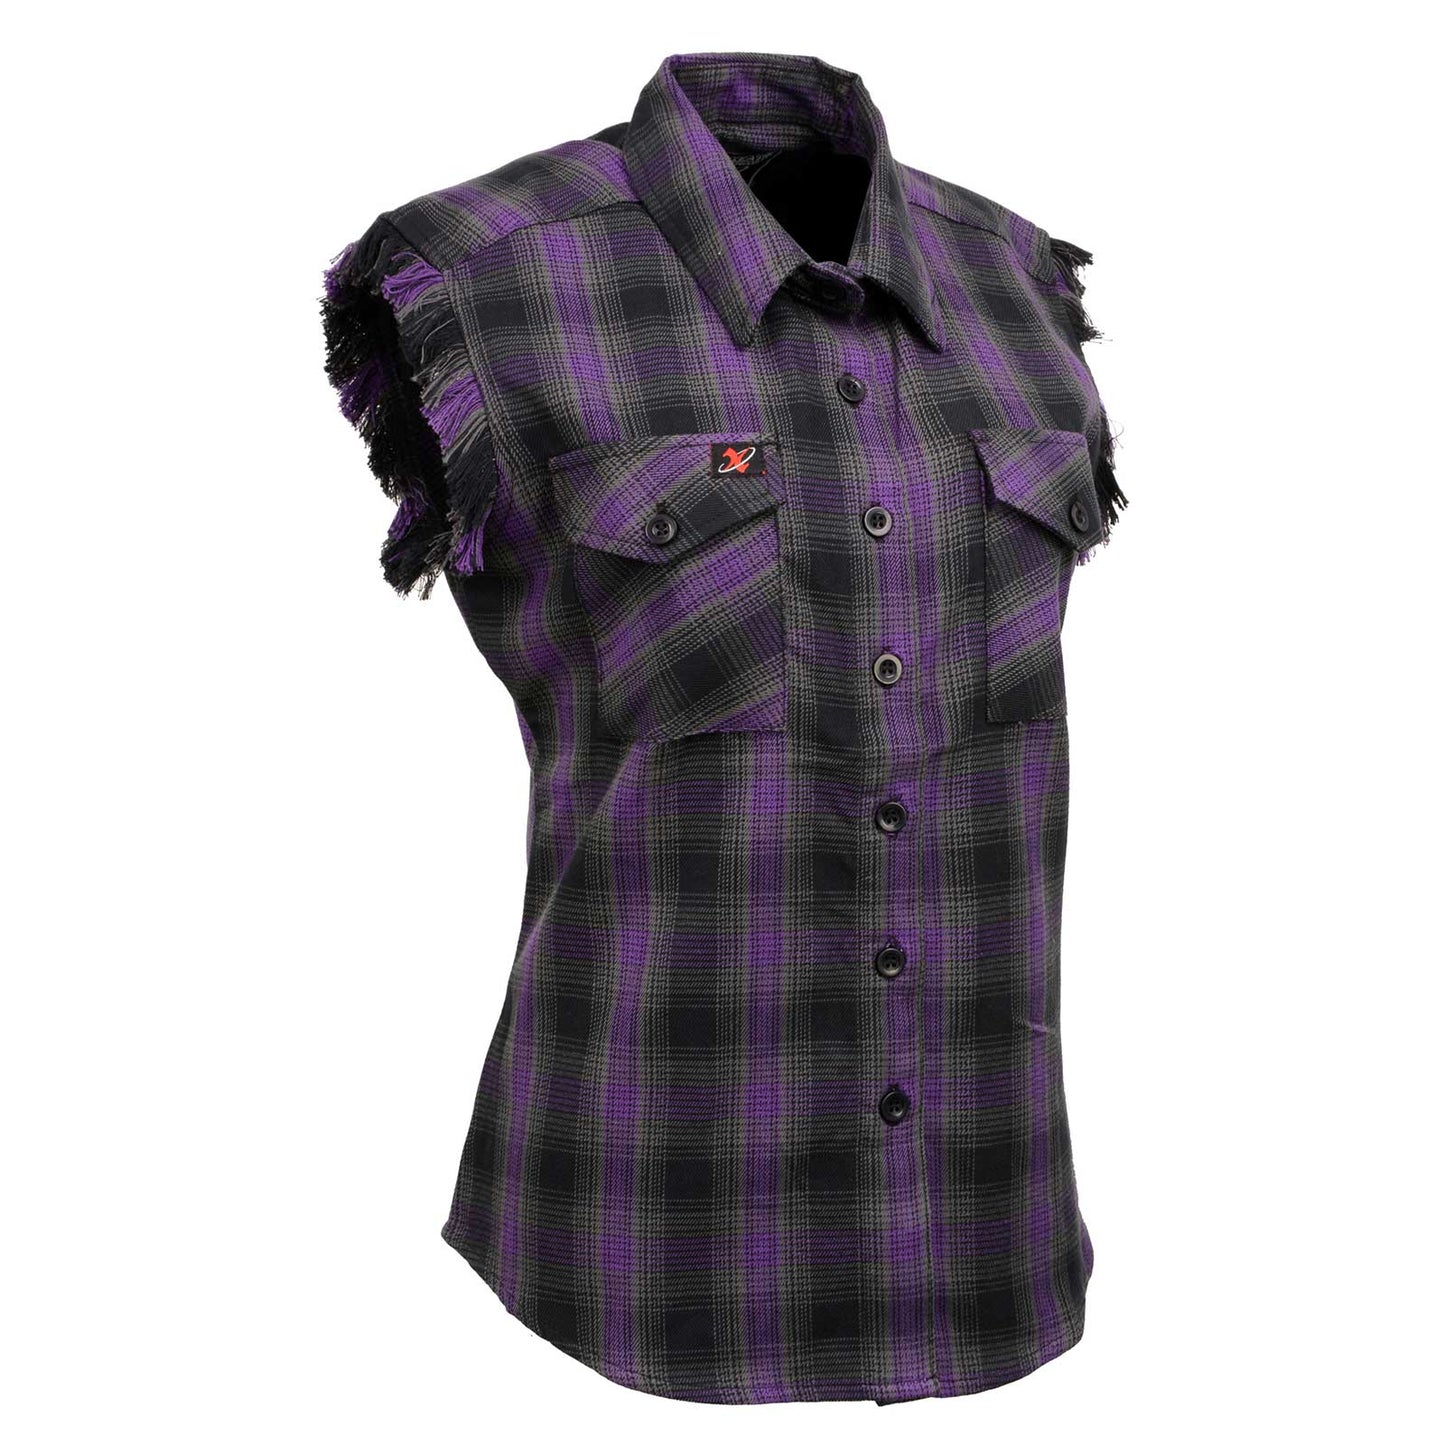 Milwaukee Leather MNG21624 Women's Flannel Black/Purple Button Down Sleeveless Cut Off Shirt w/ Frill Arm